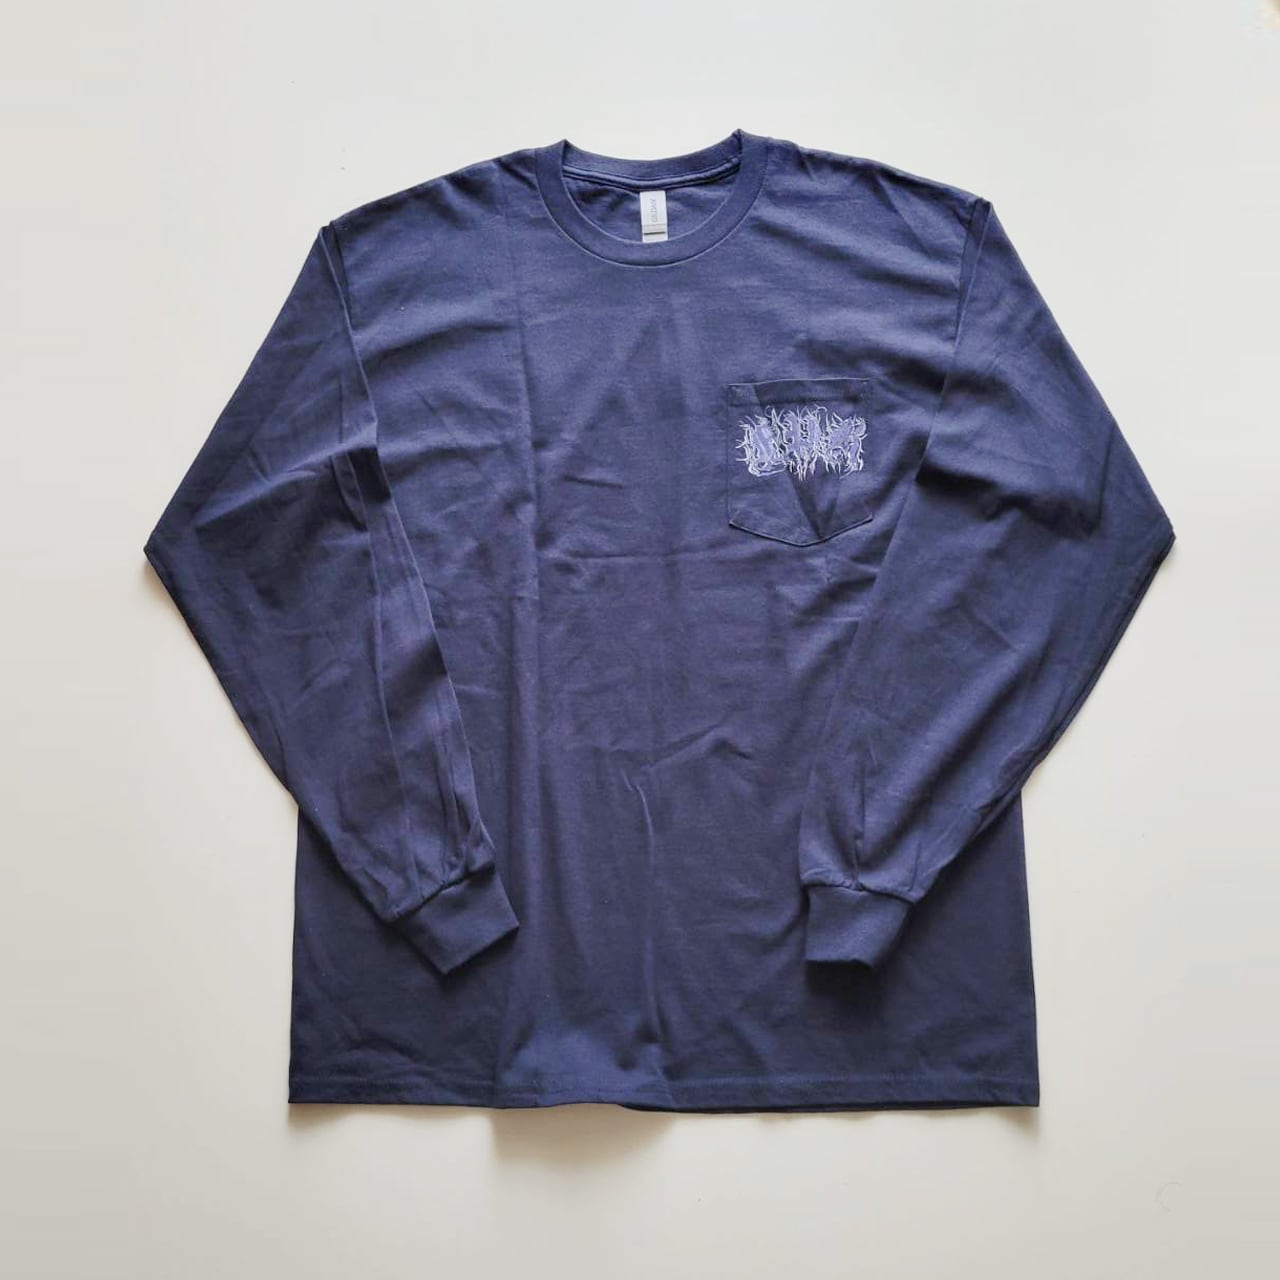 FAT PIGEON RECORDS "Frail" LONG TEE NAVY L